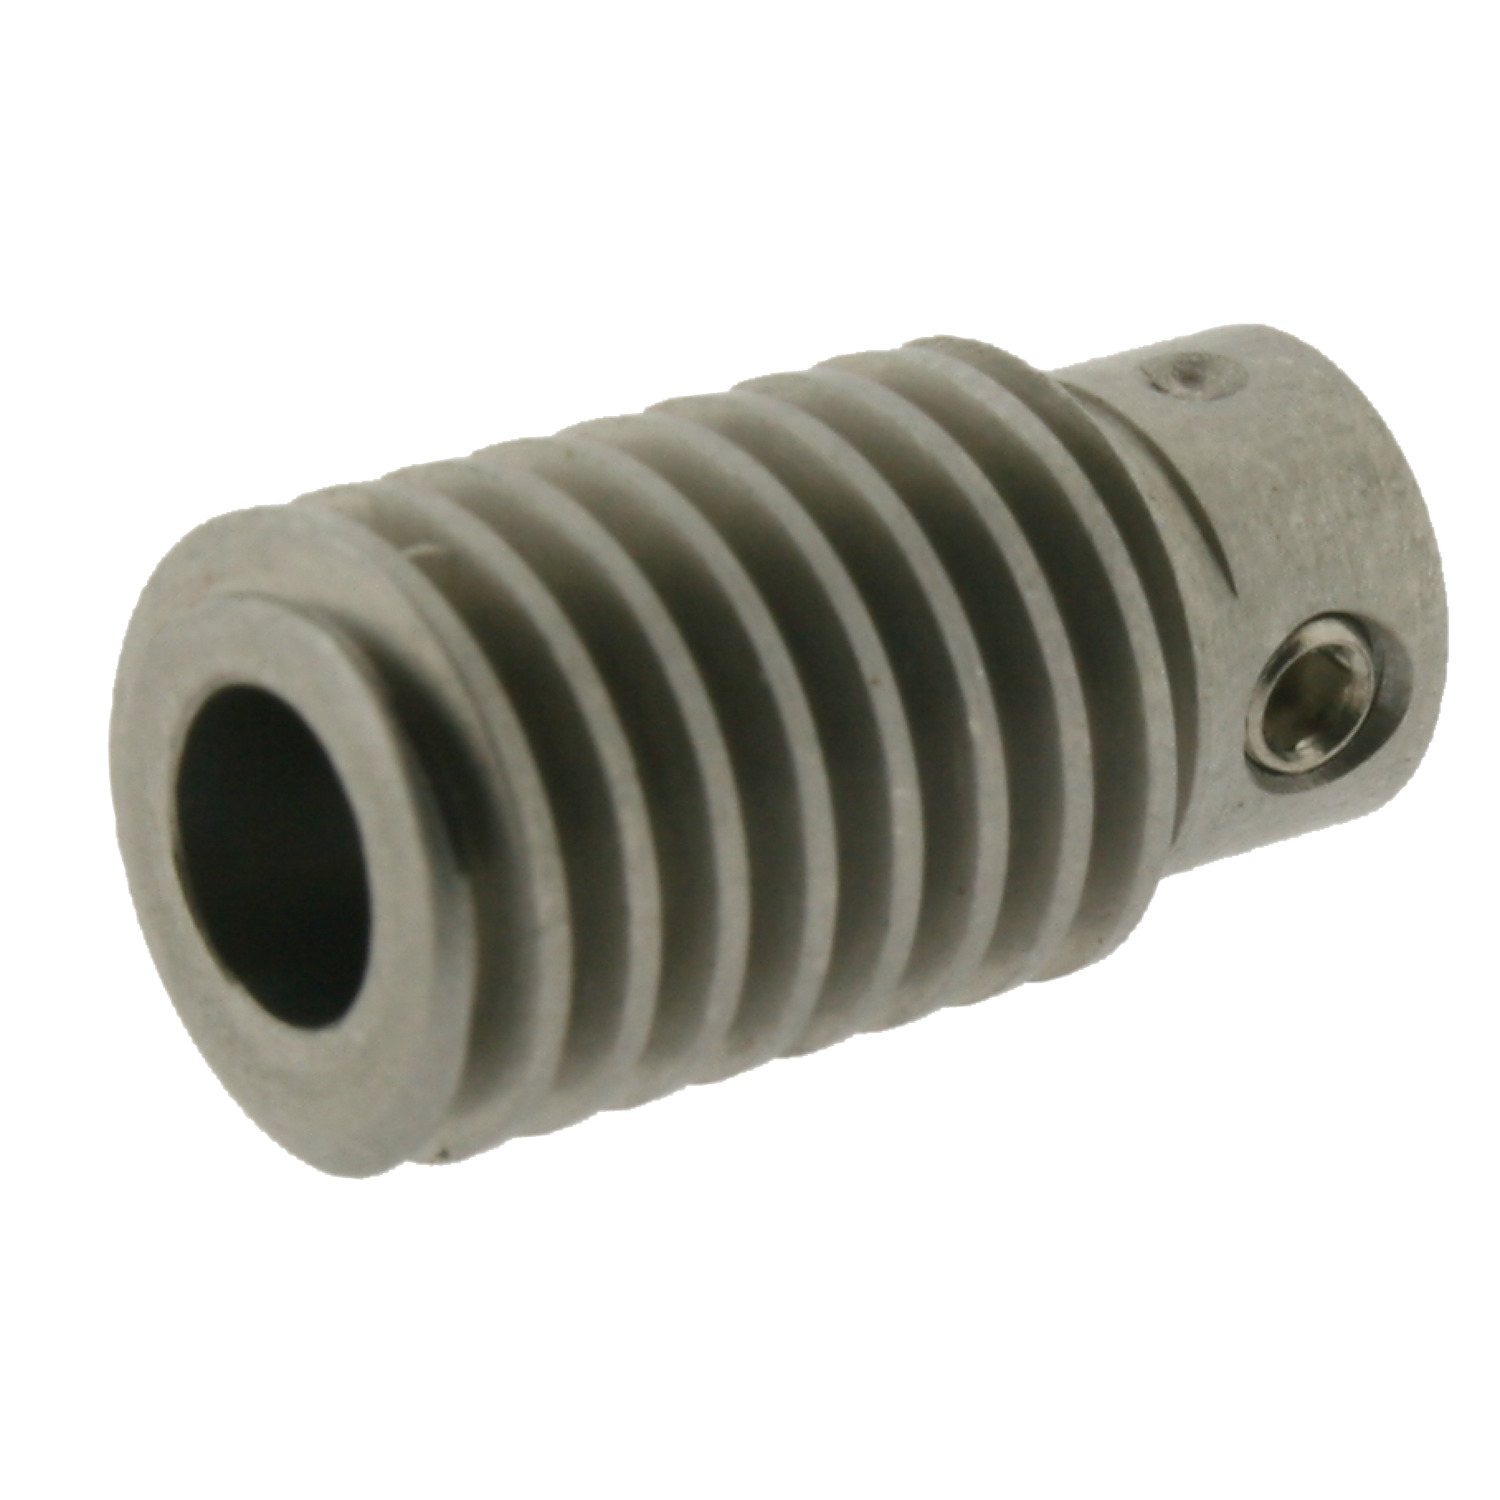 Product R2132, 1,5 Module Precision Worms stainless steel / 